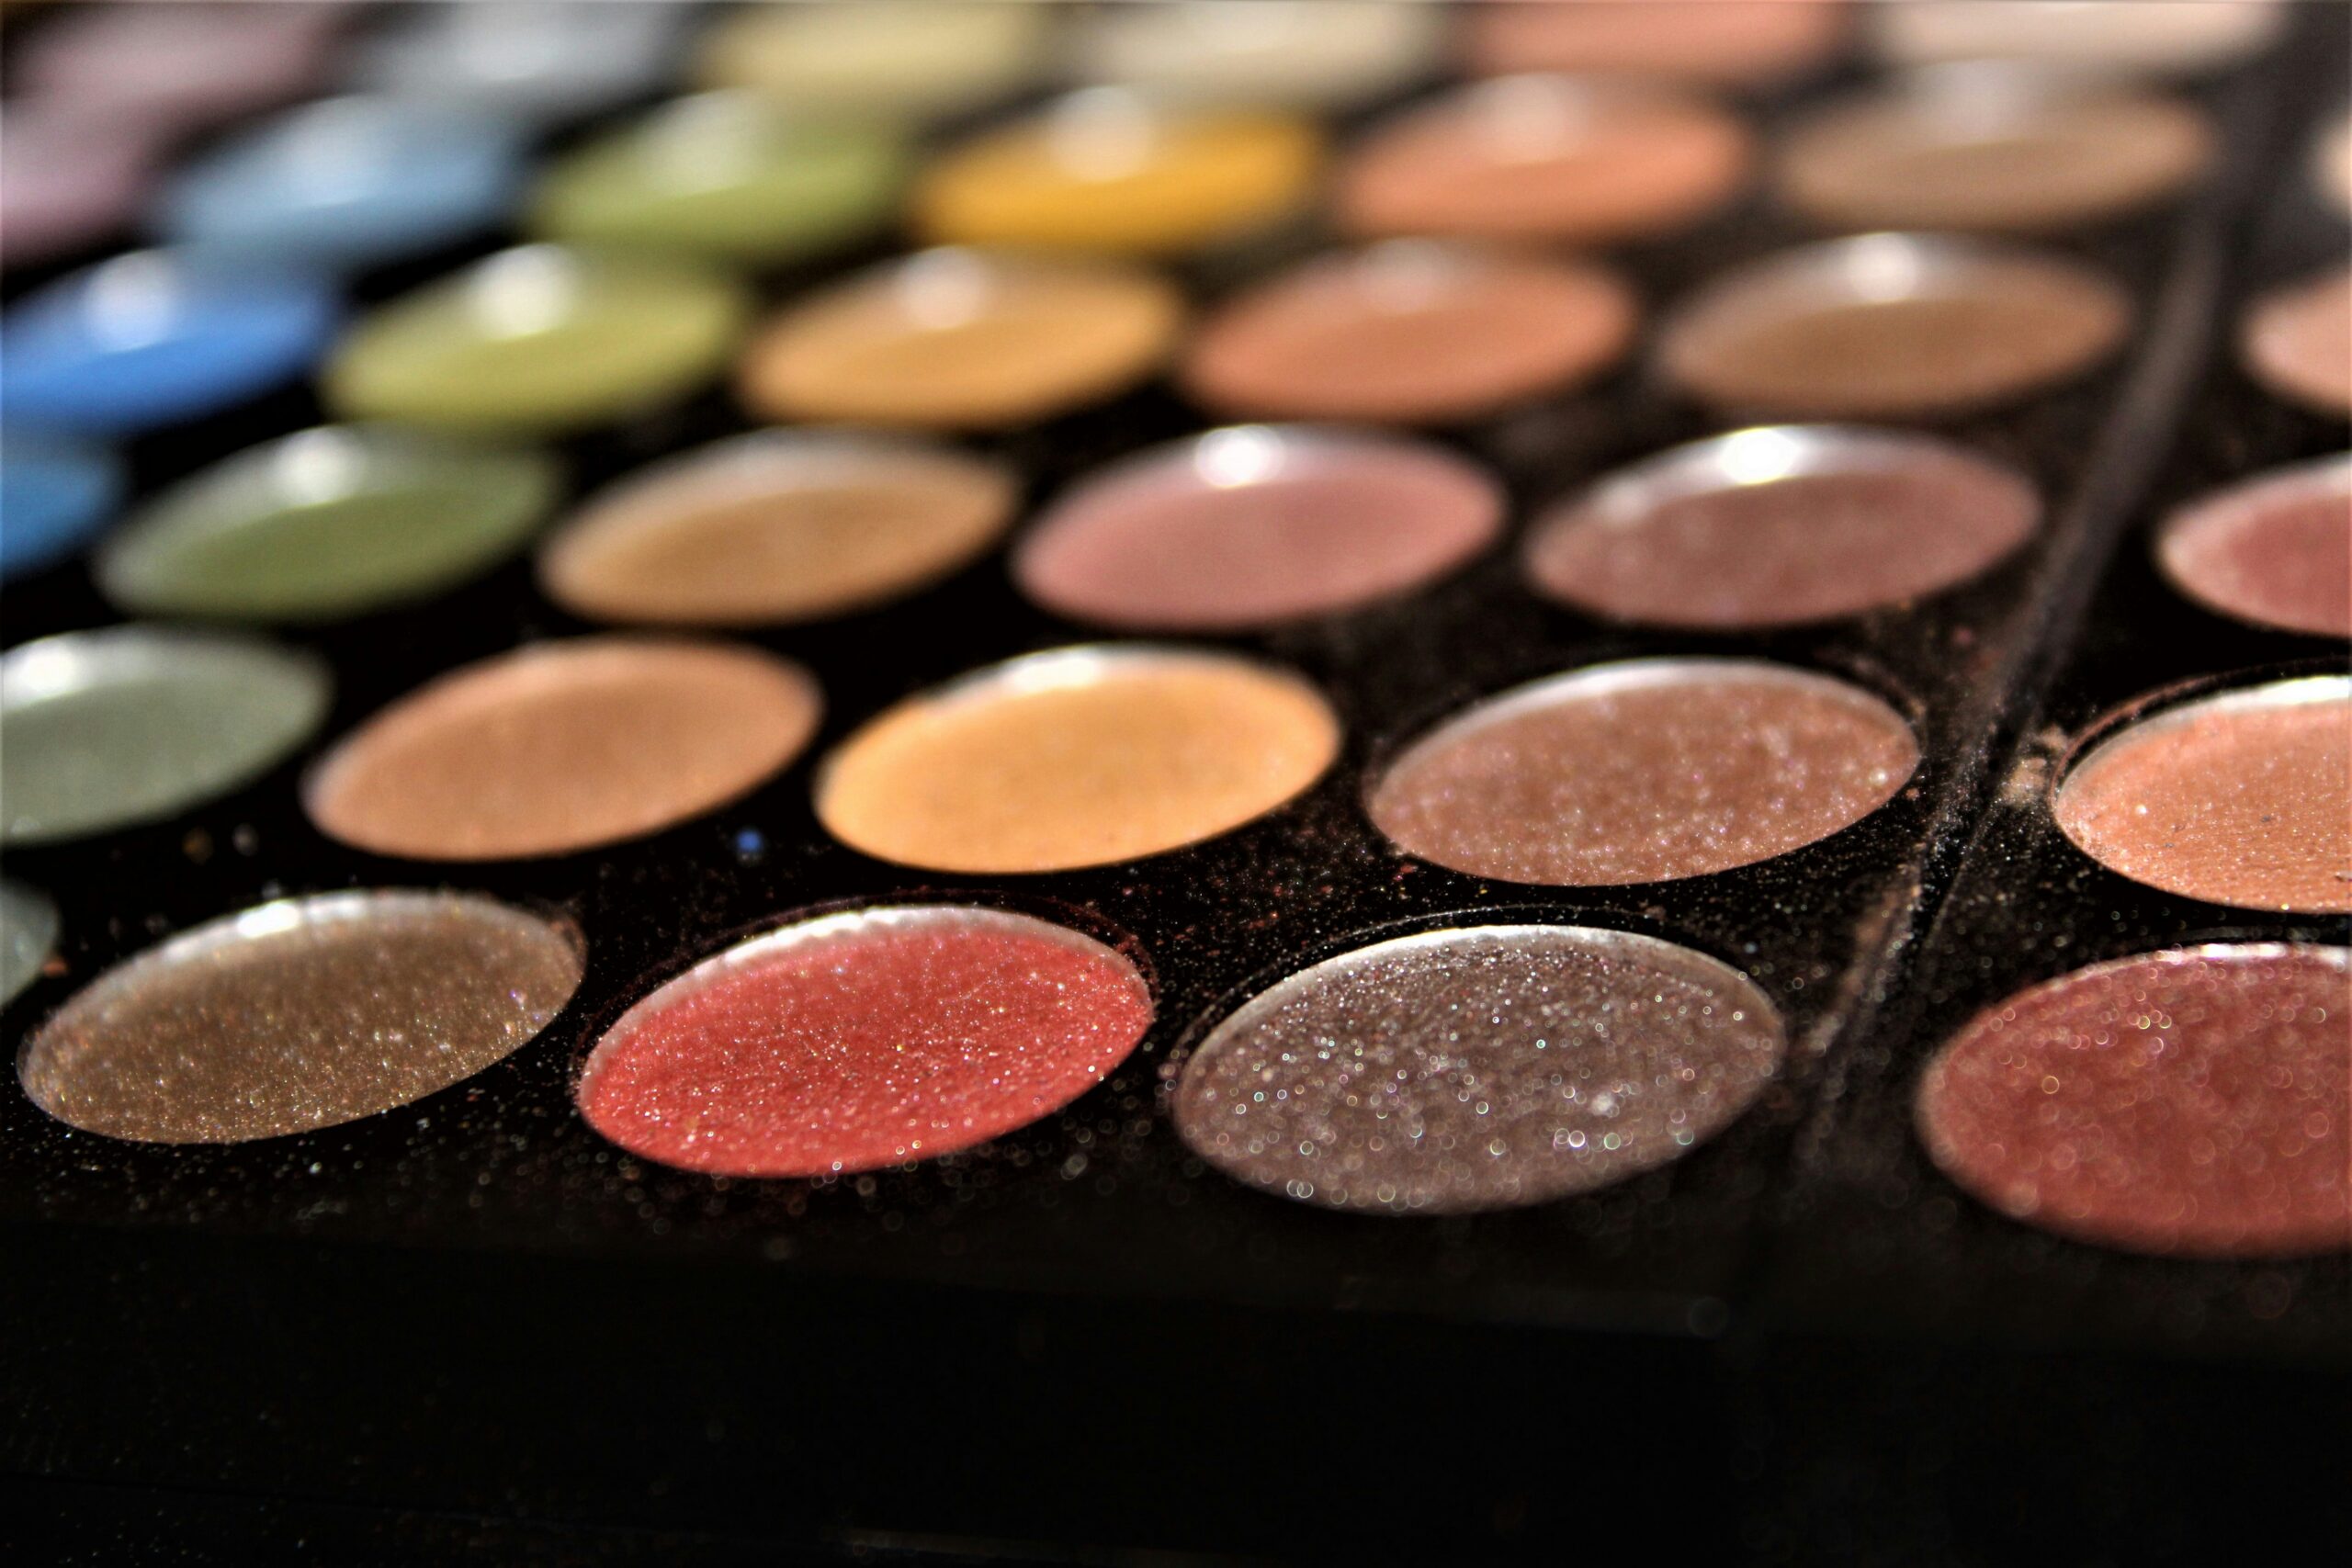 A Trip to Sephora and the MOST Beautiful Eyeshadow